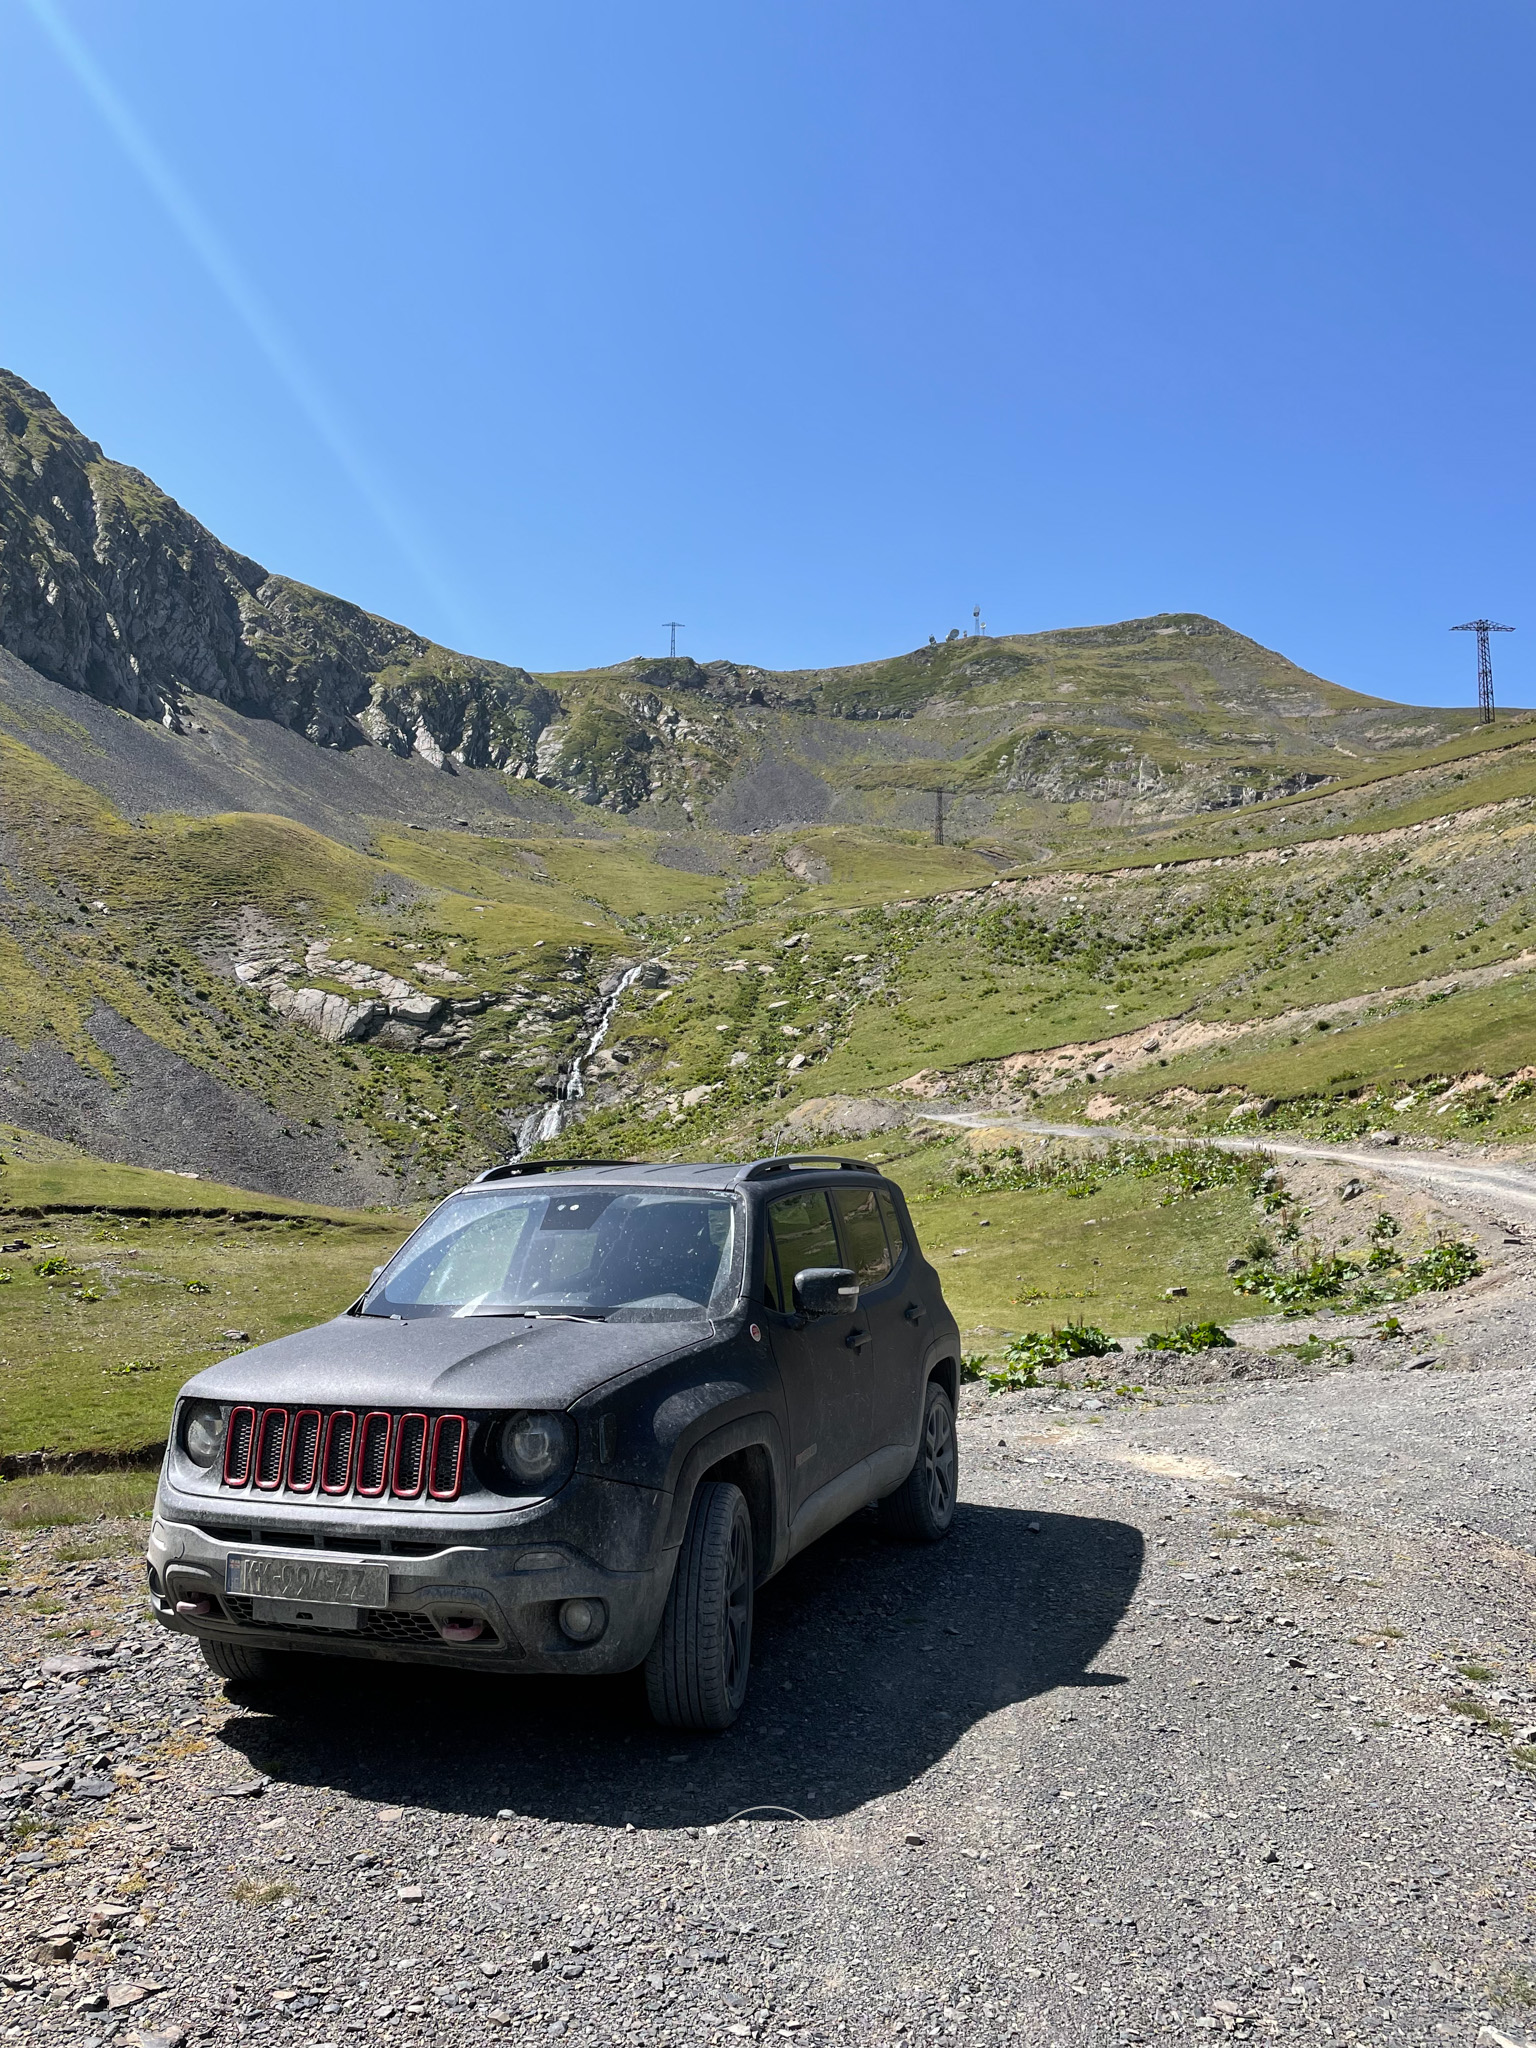 Our Jeep Renegade proved to be a match for the road to Omalo